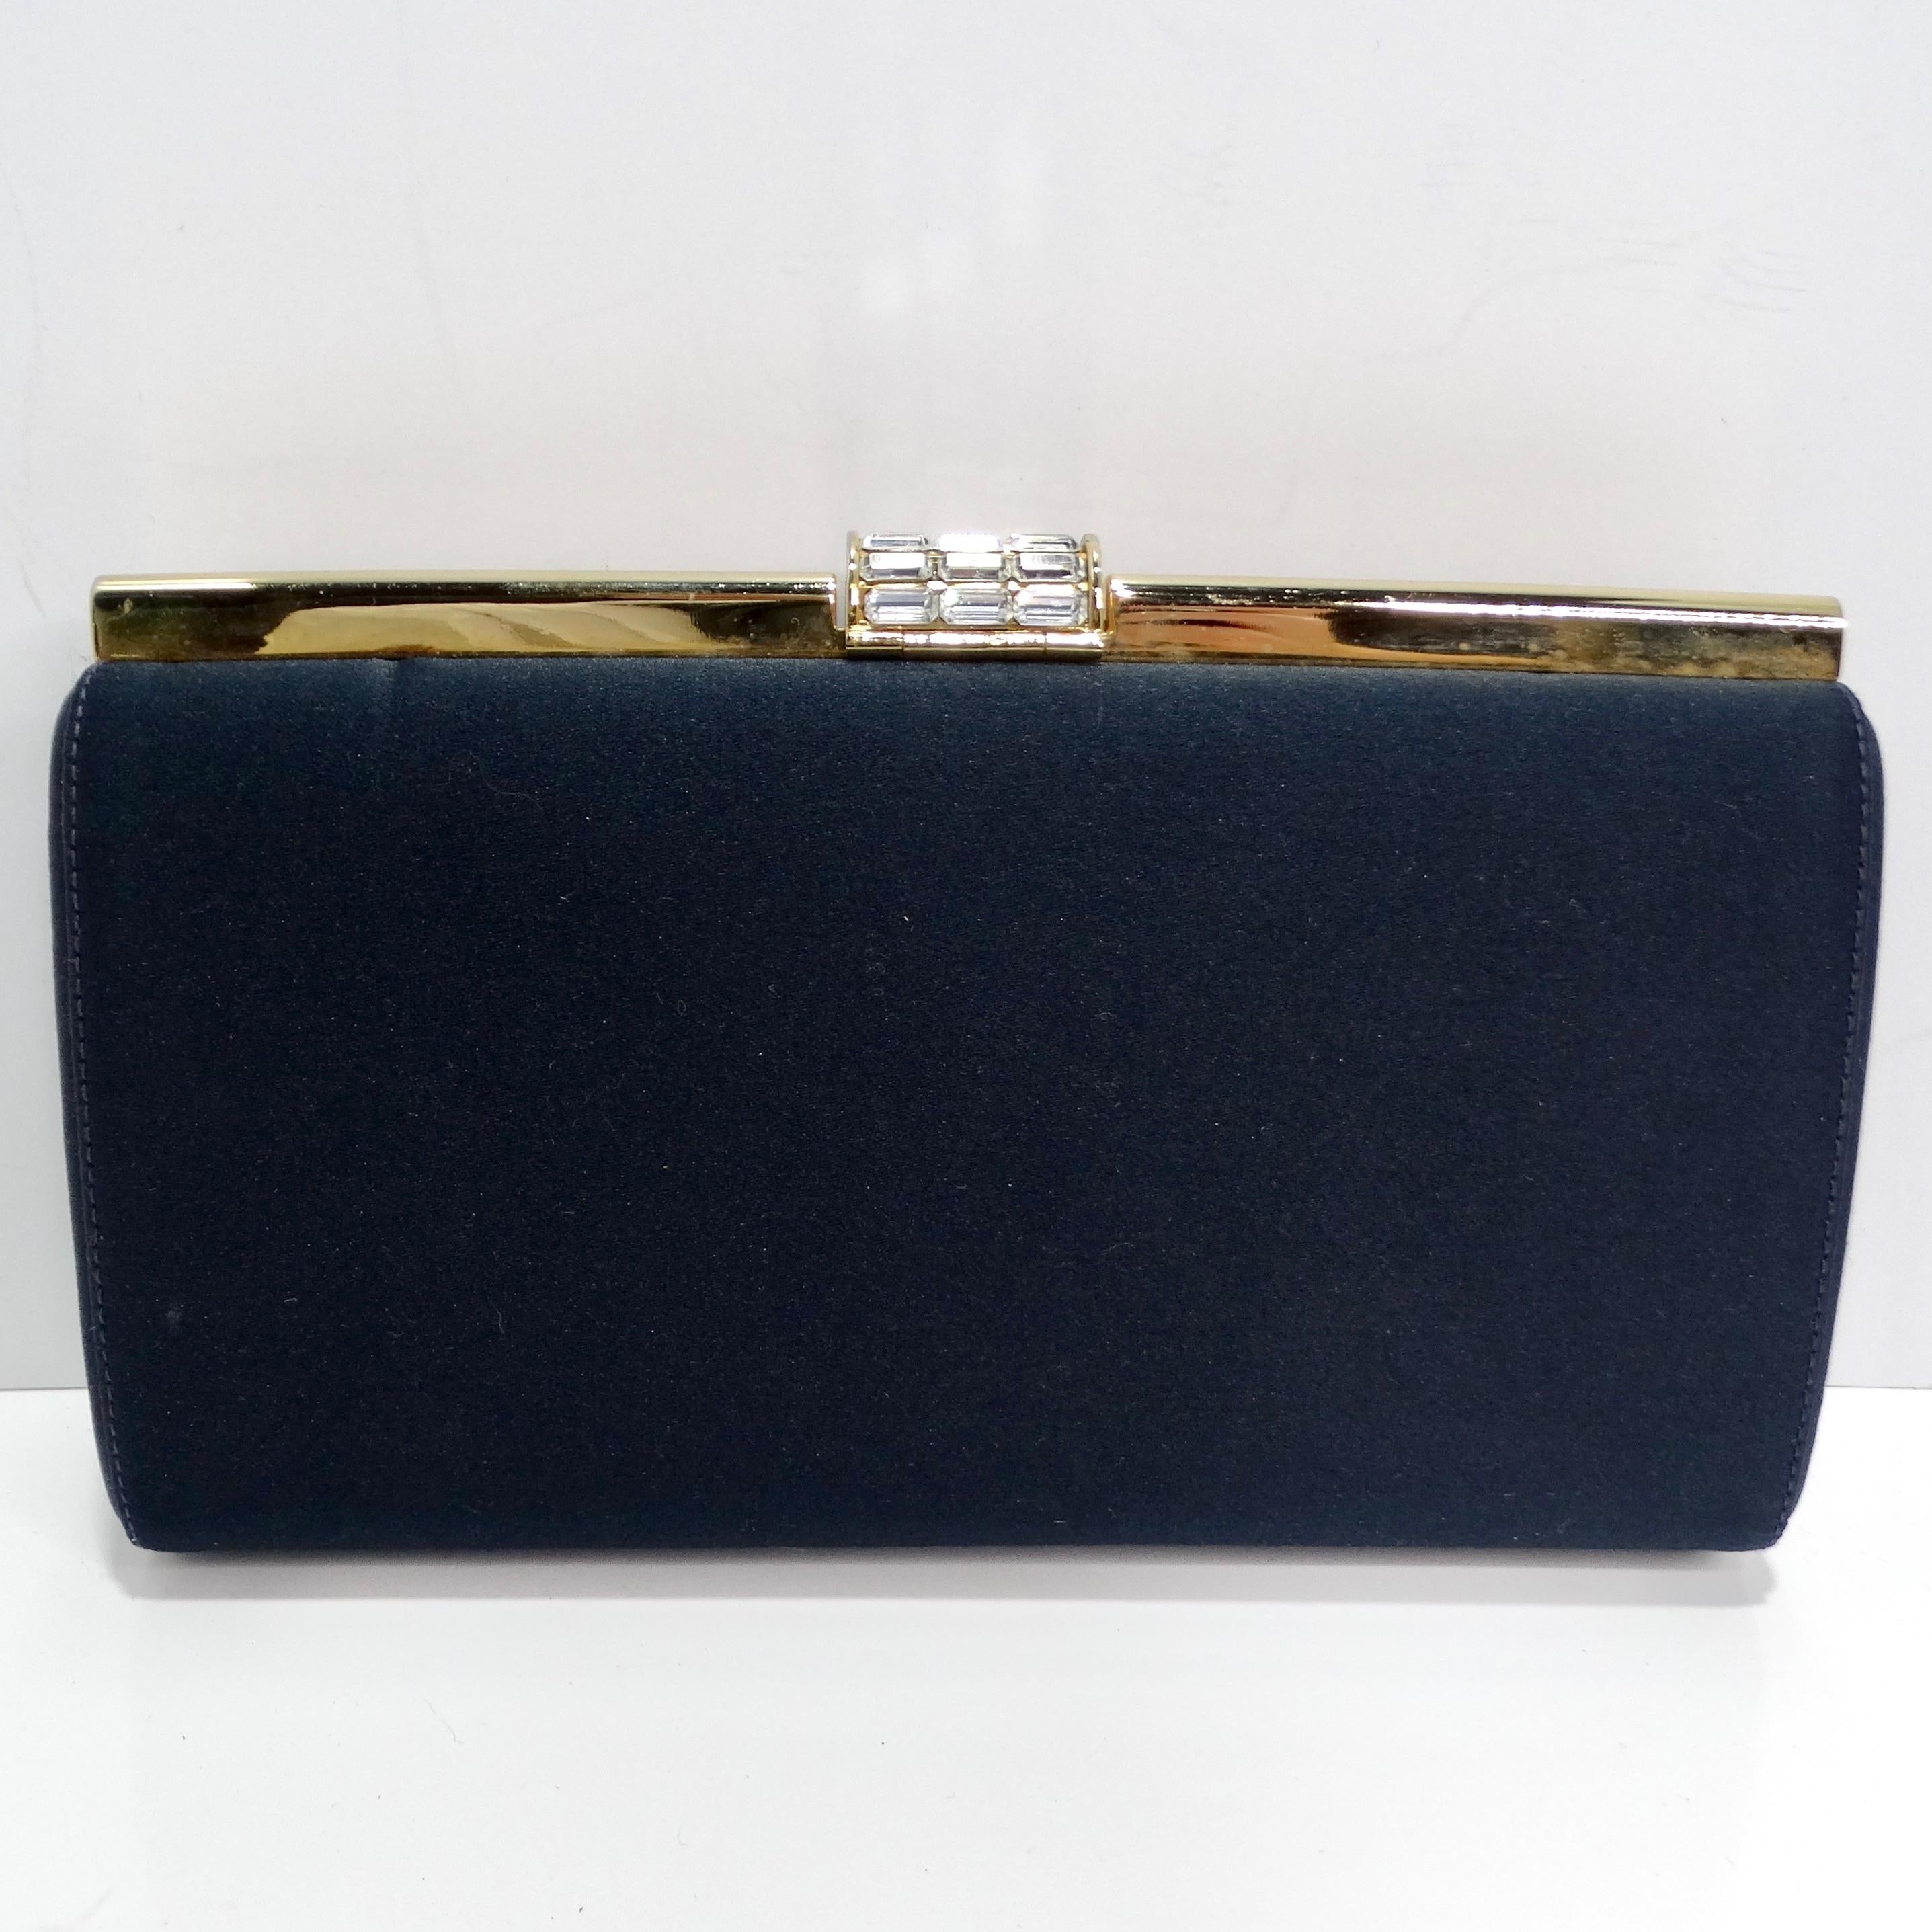 Introducing the elegant Rodo 1980s Navy Clutch, a timeless accessory that effortlessly combines sophistication and versatility. Crafted from luxurious navy blue leather, this classic rectangular clutch exudes understated glamour.

The clutch is